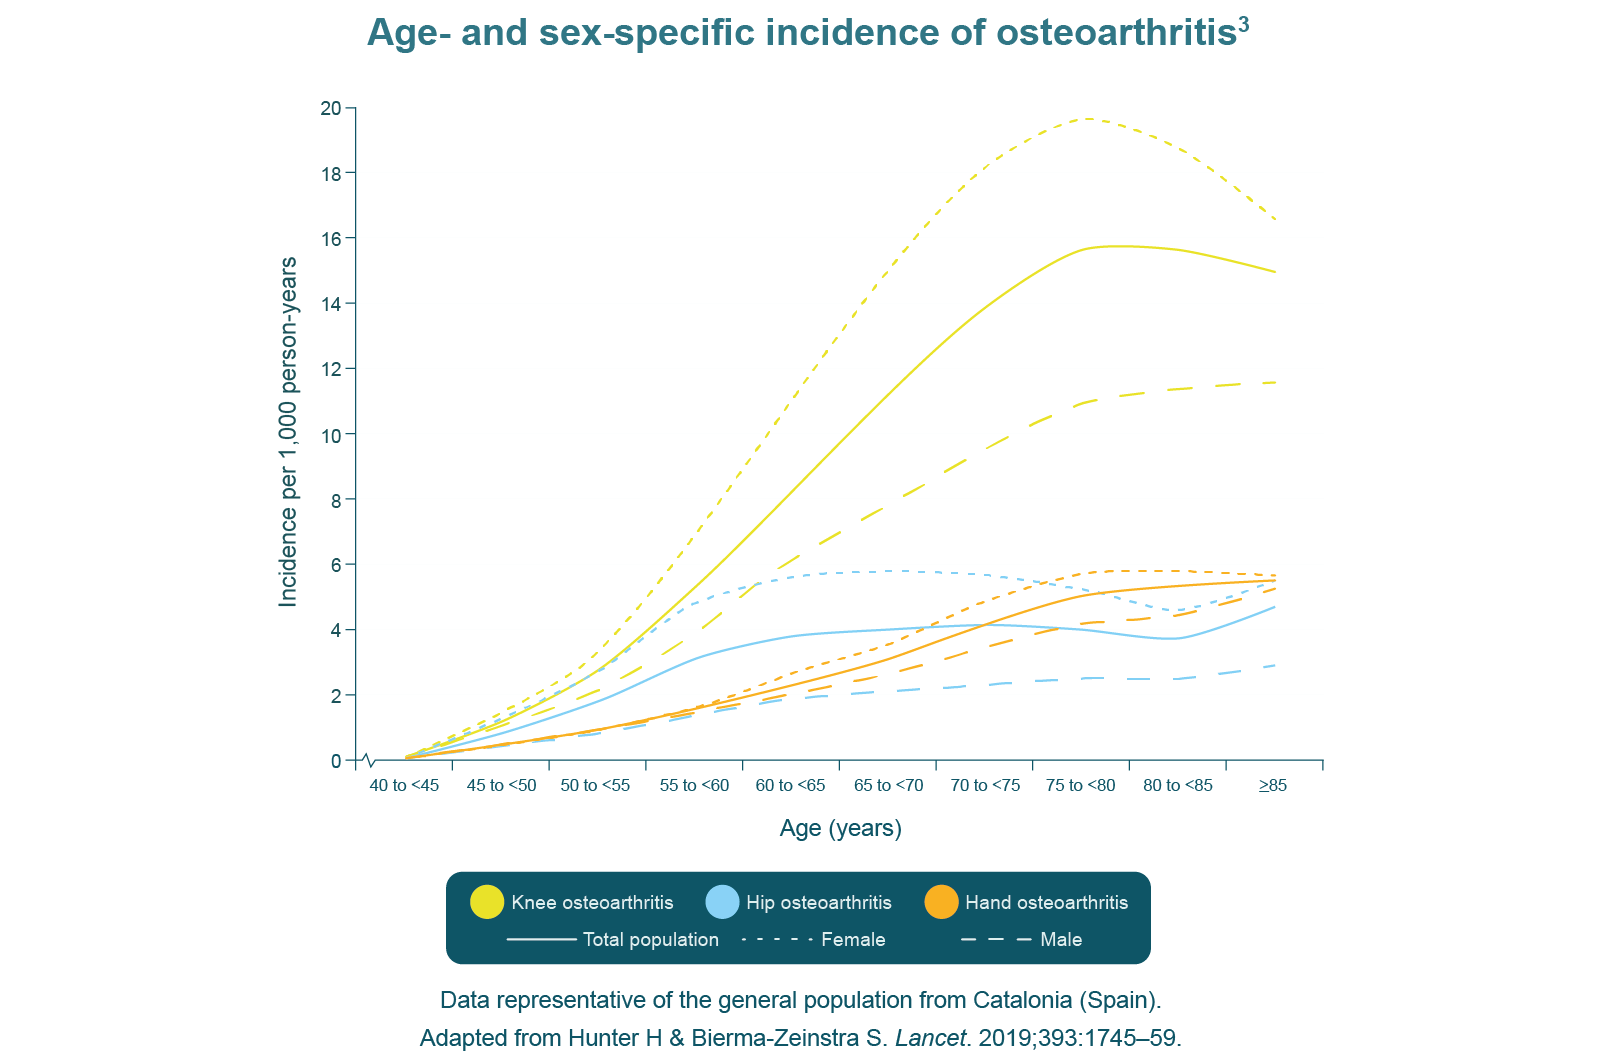 Age and sex specific incidence of osteoarthritis